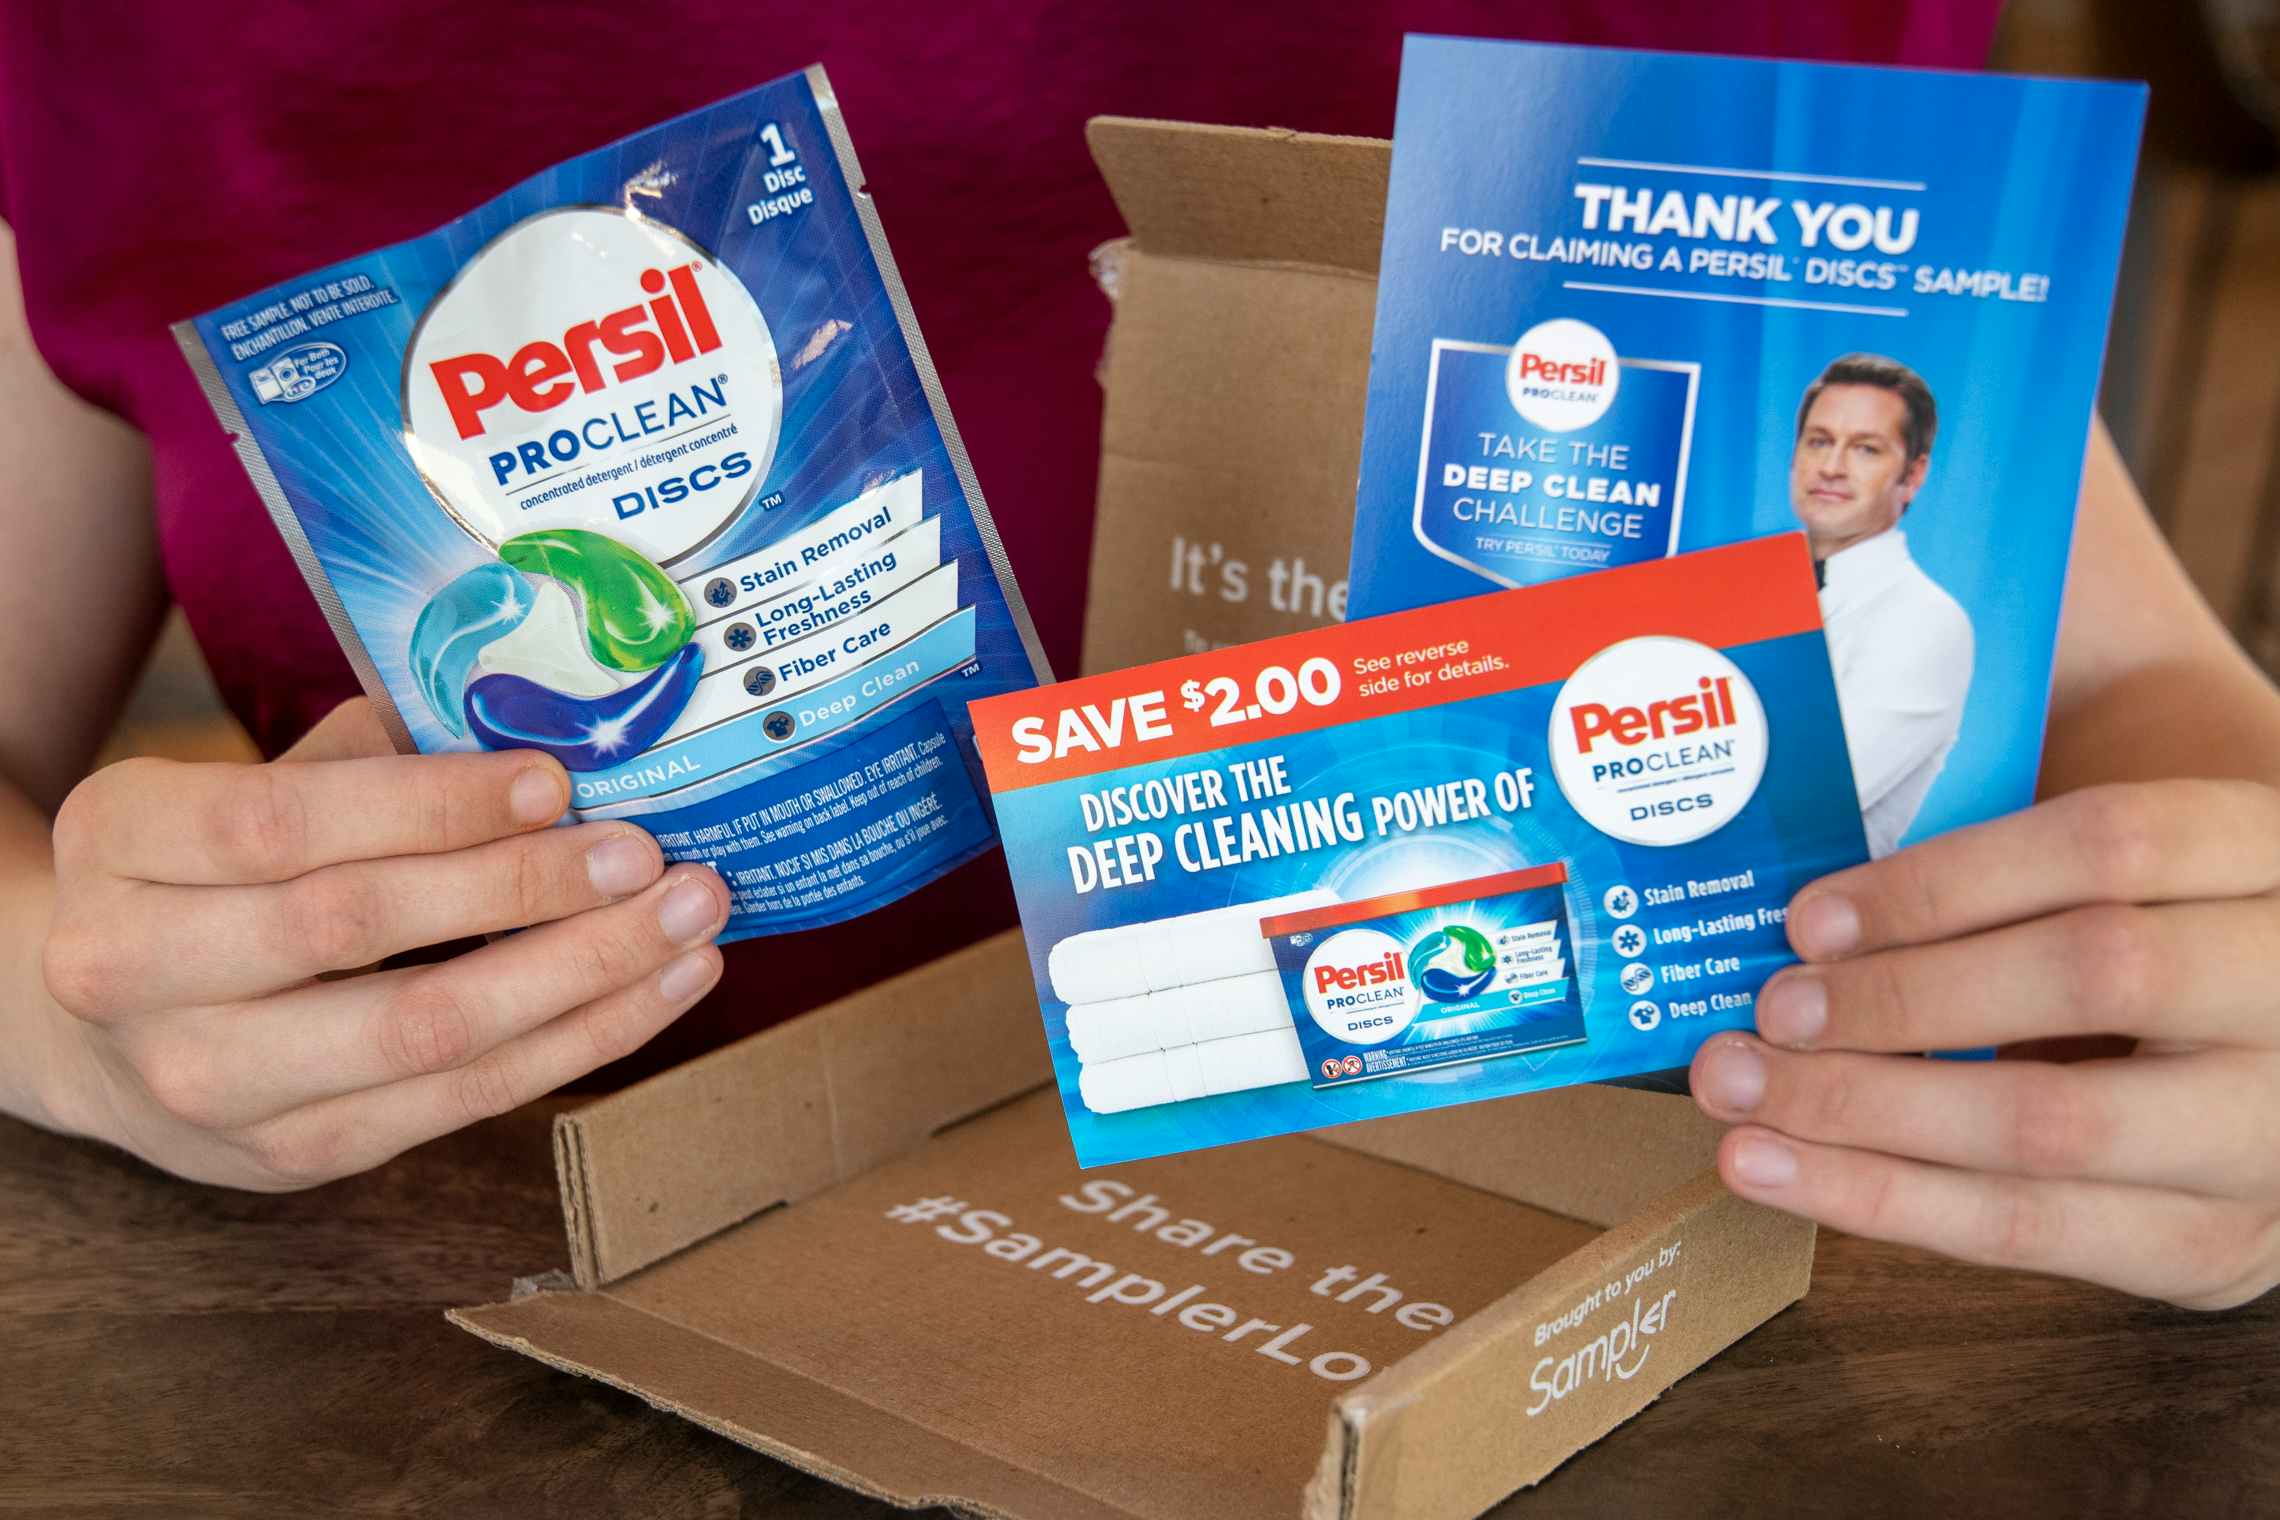 A woman holding a coupon, advertisement, and pouch with a free sample of Persil proclean discs.